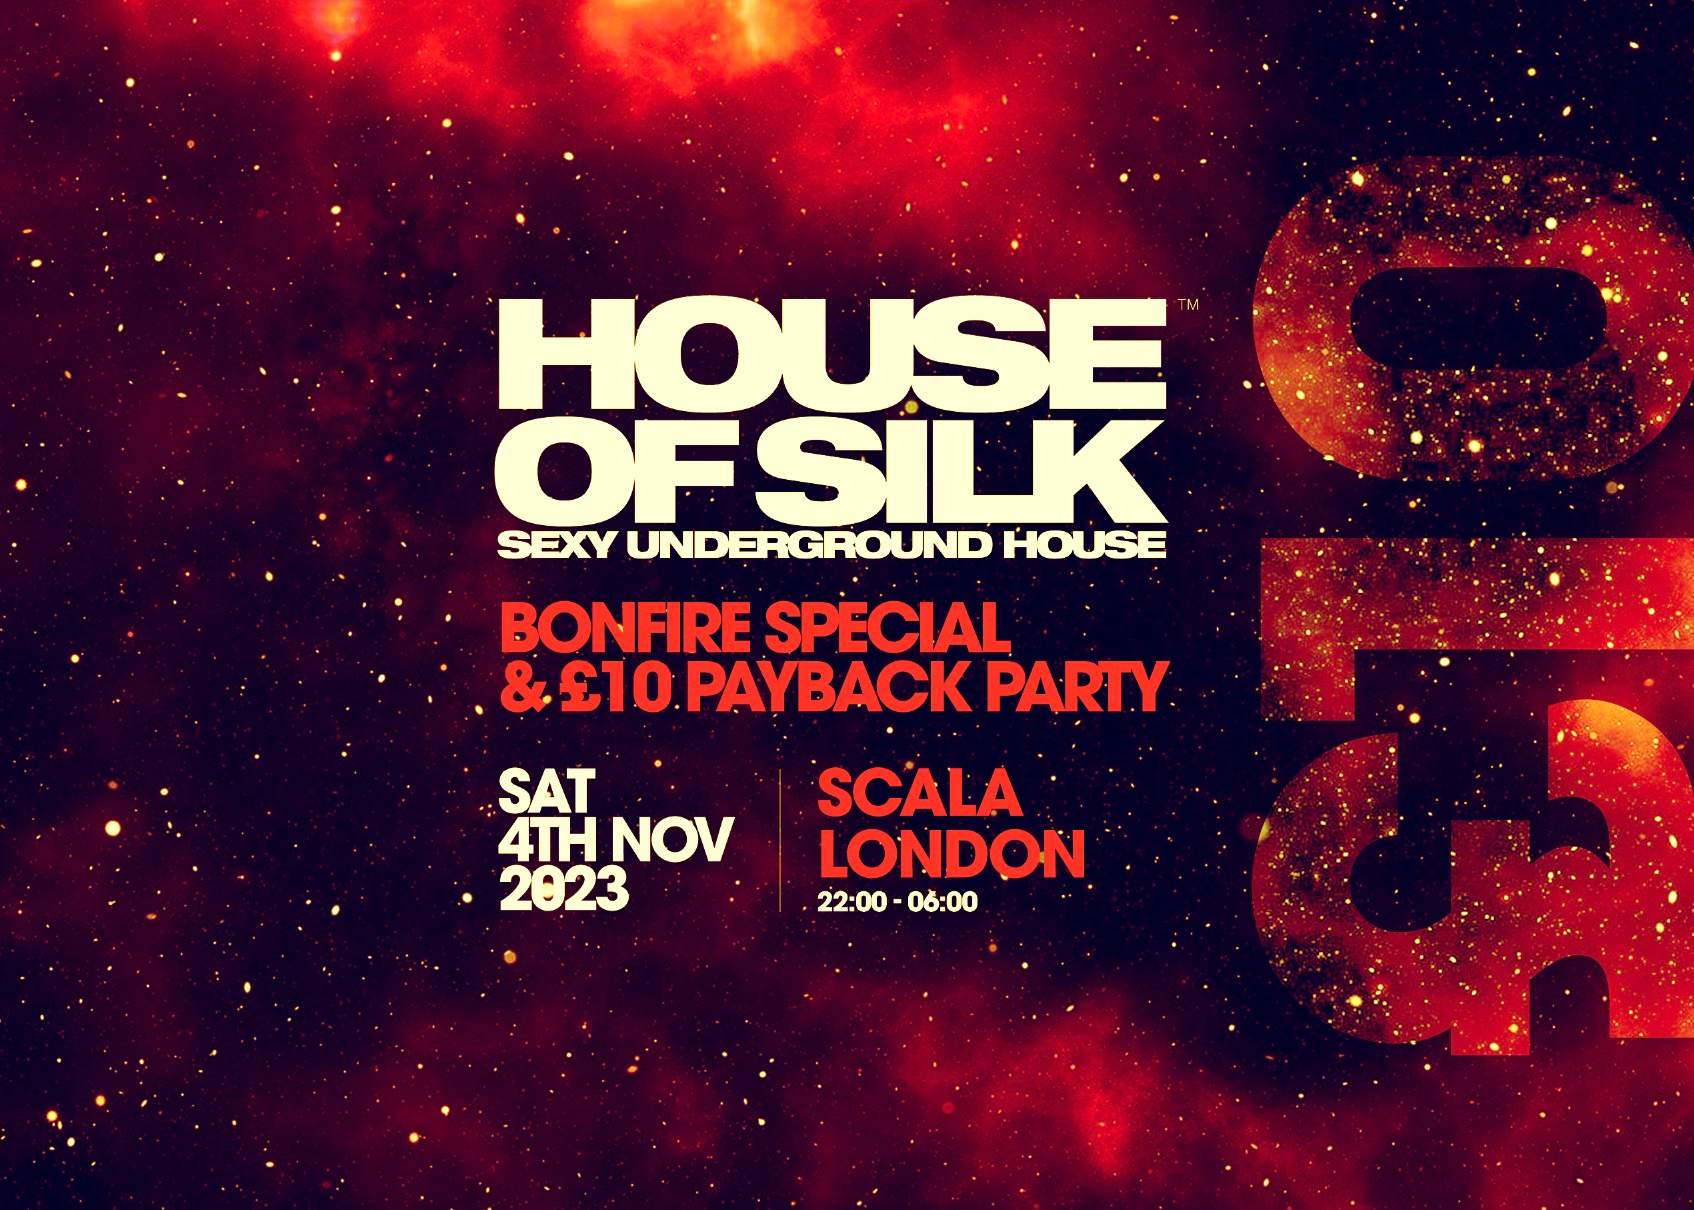 House Of Silk -  Payback Party & Bonfire Special & J Bows Birthday  - フライヤー表